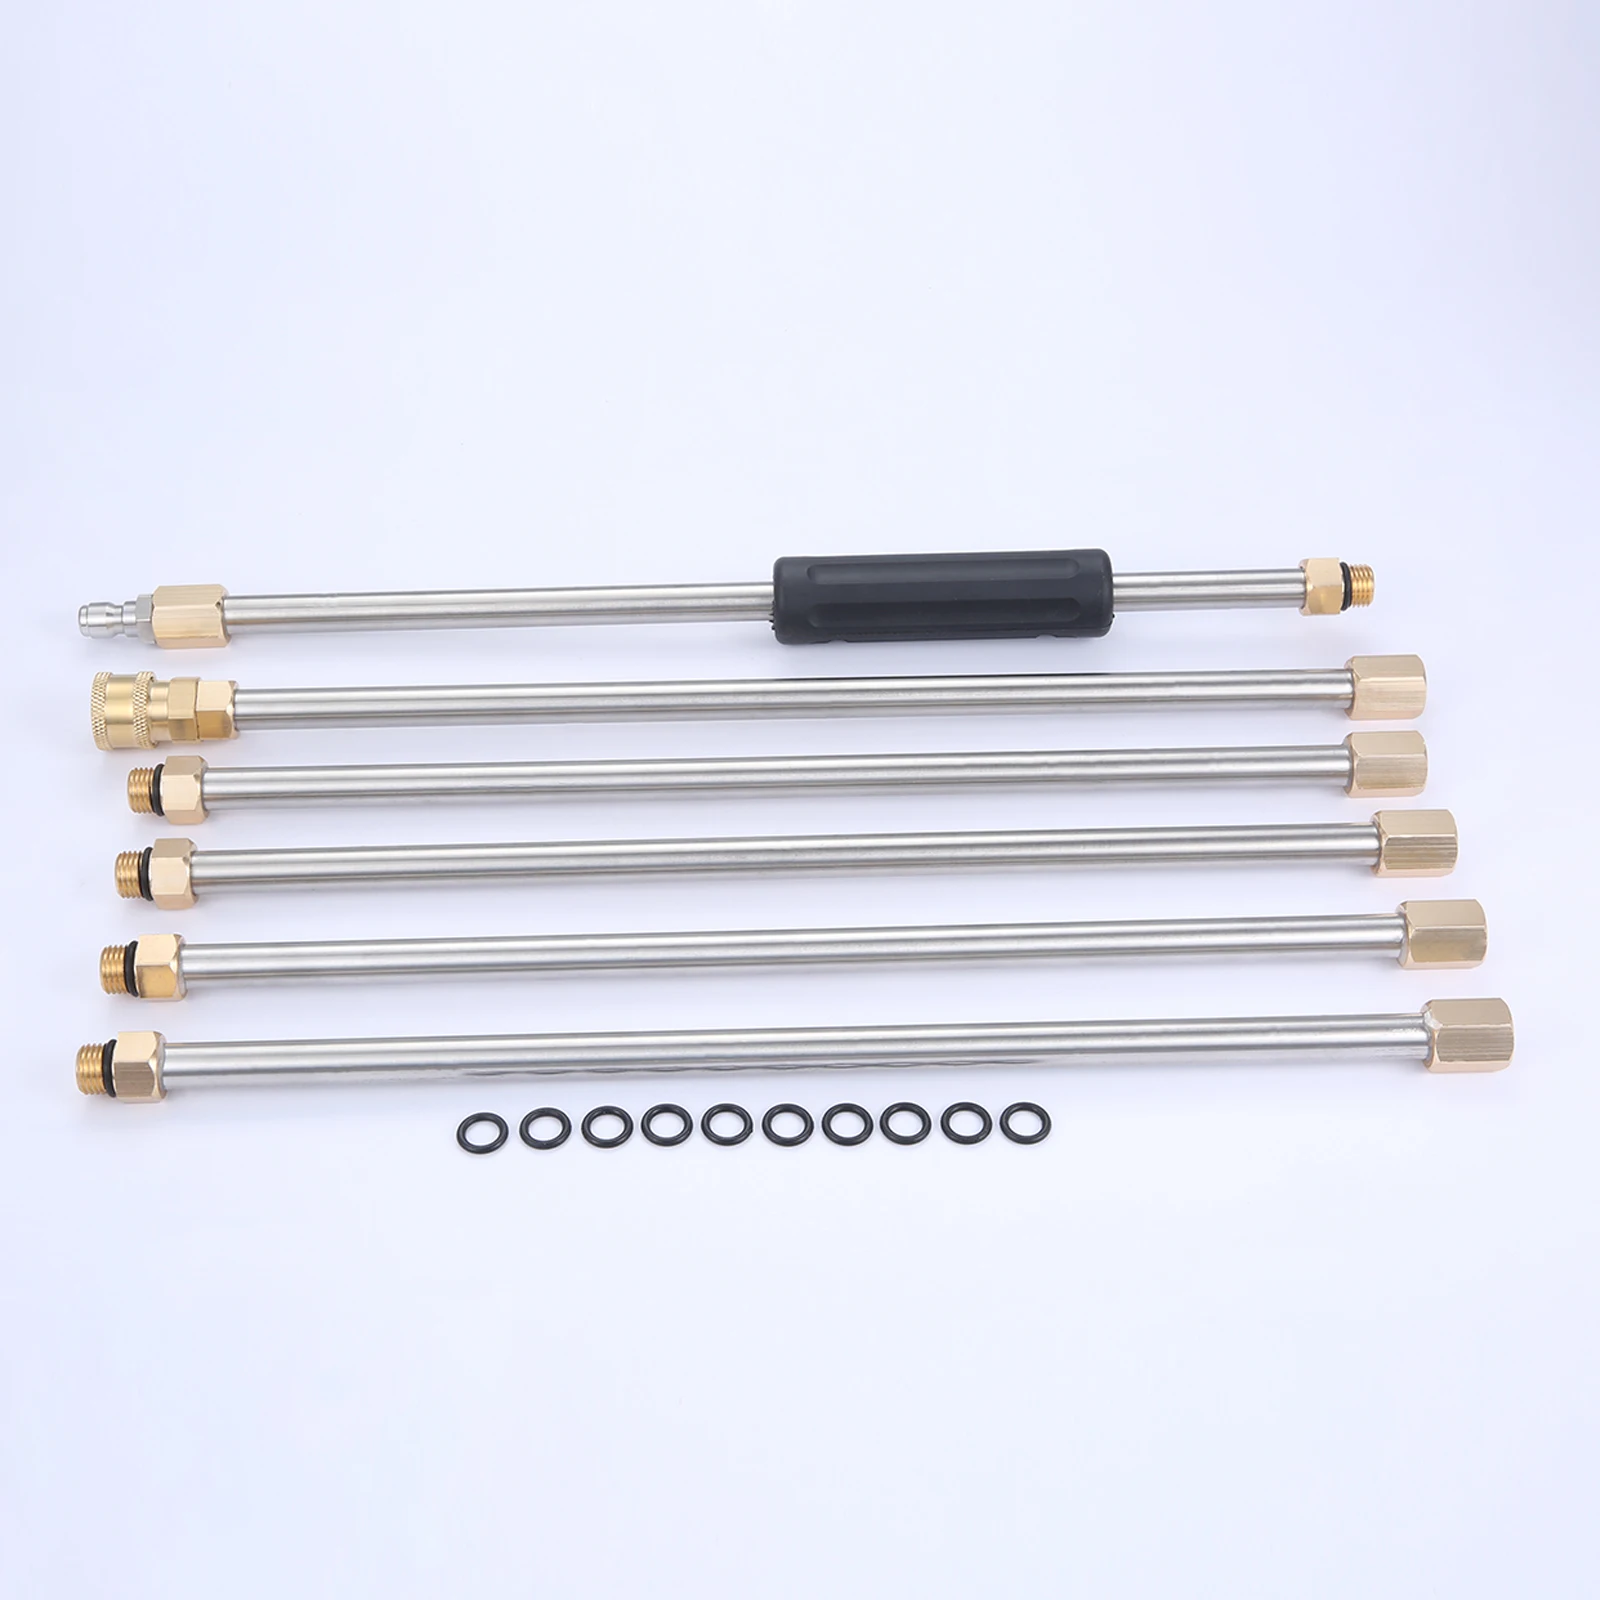 

6pcs/1kit Universal Pressure Washer Extension Wand 90Inch Stainless Steel with O-Rings 1/4" Quick Connect 4000PSI Replace Lance